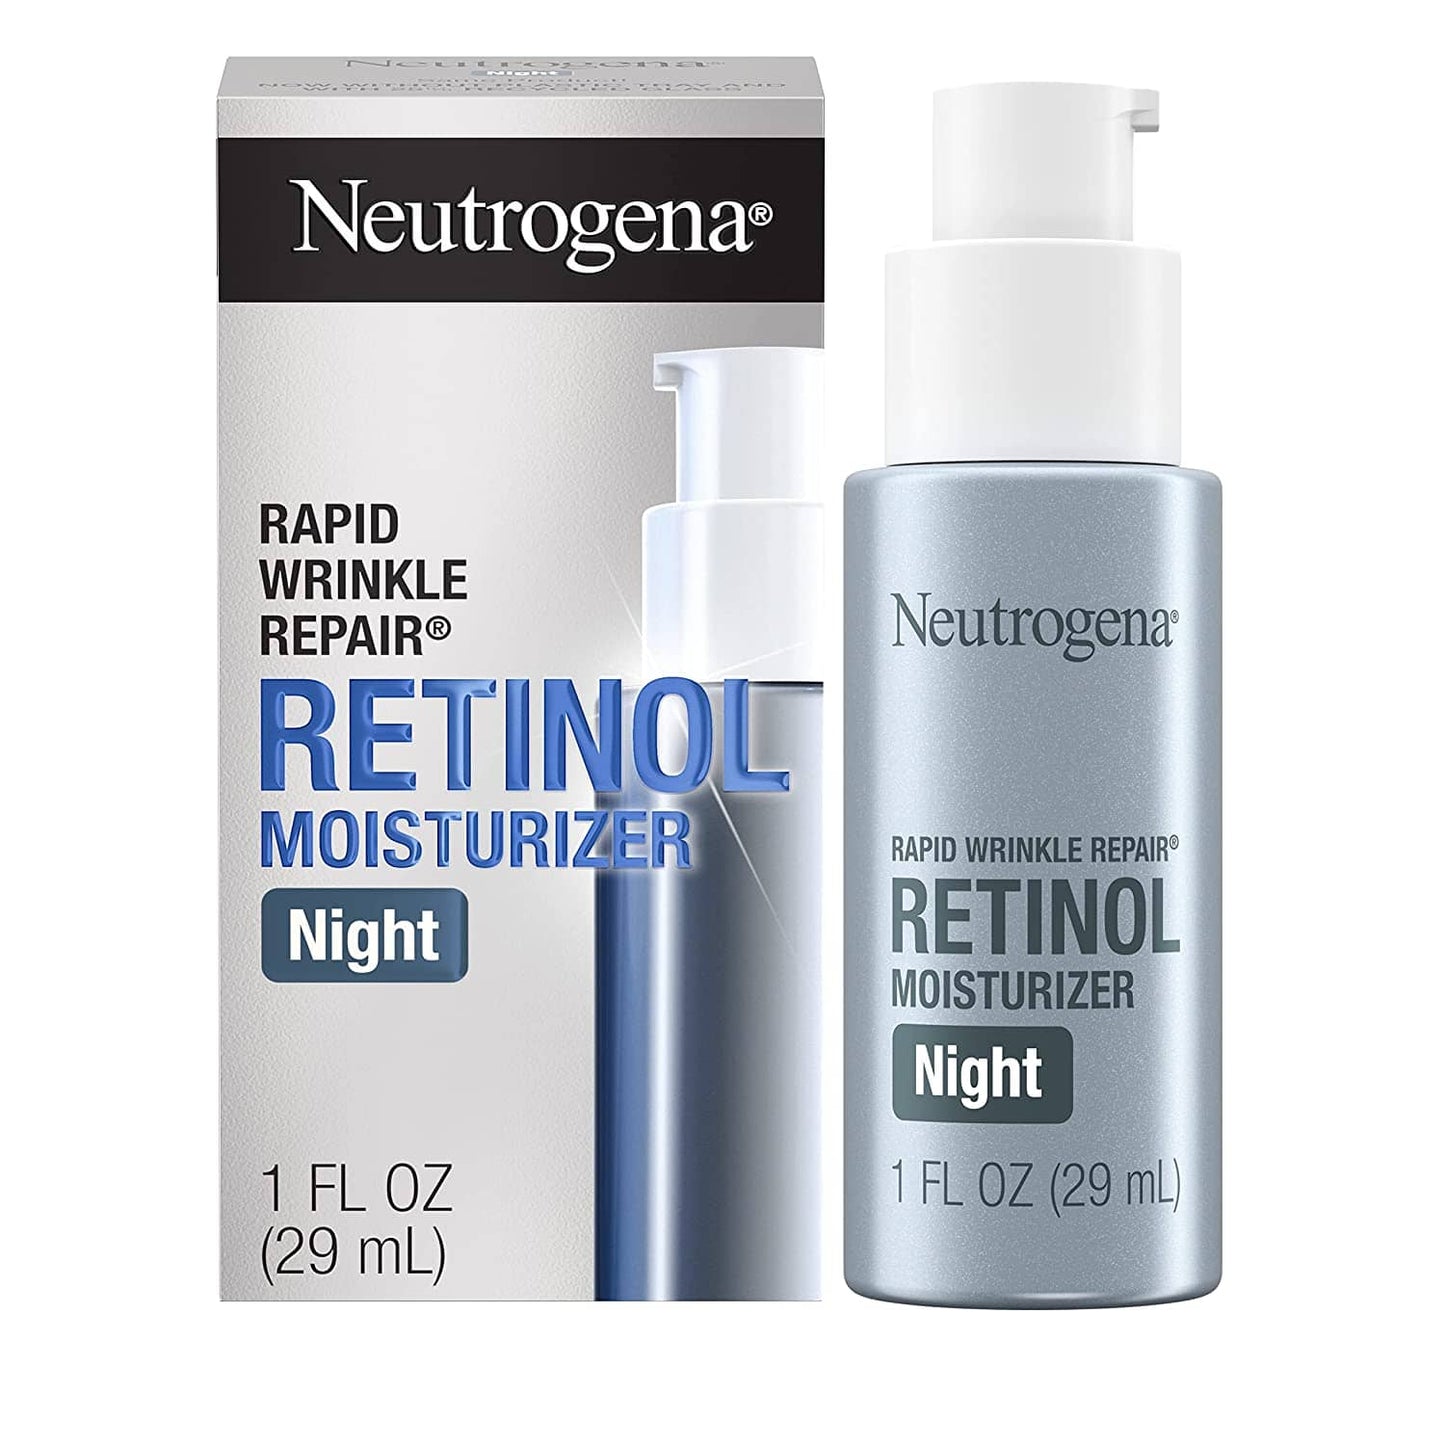 Neutrogena Rapid Wrinkle Repair Night Moisturizer is specially formulated for use at night, powered with Accelerated Retinol SA